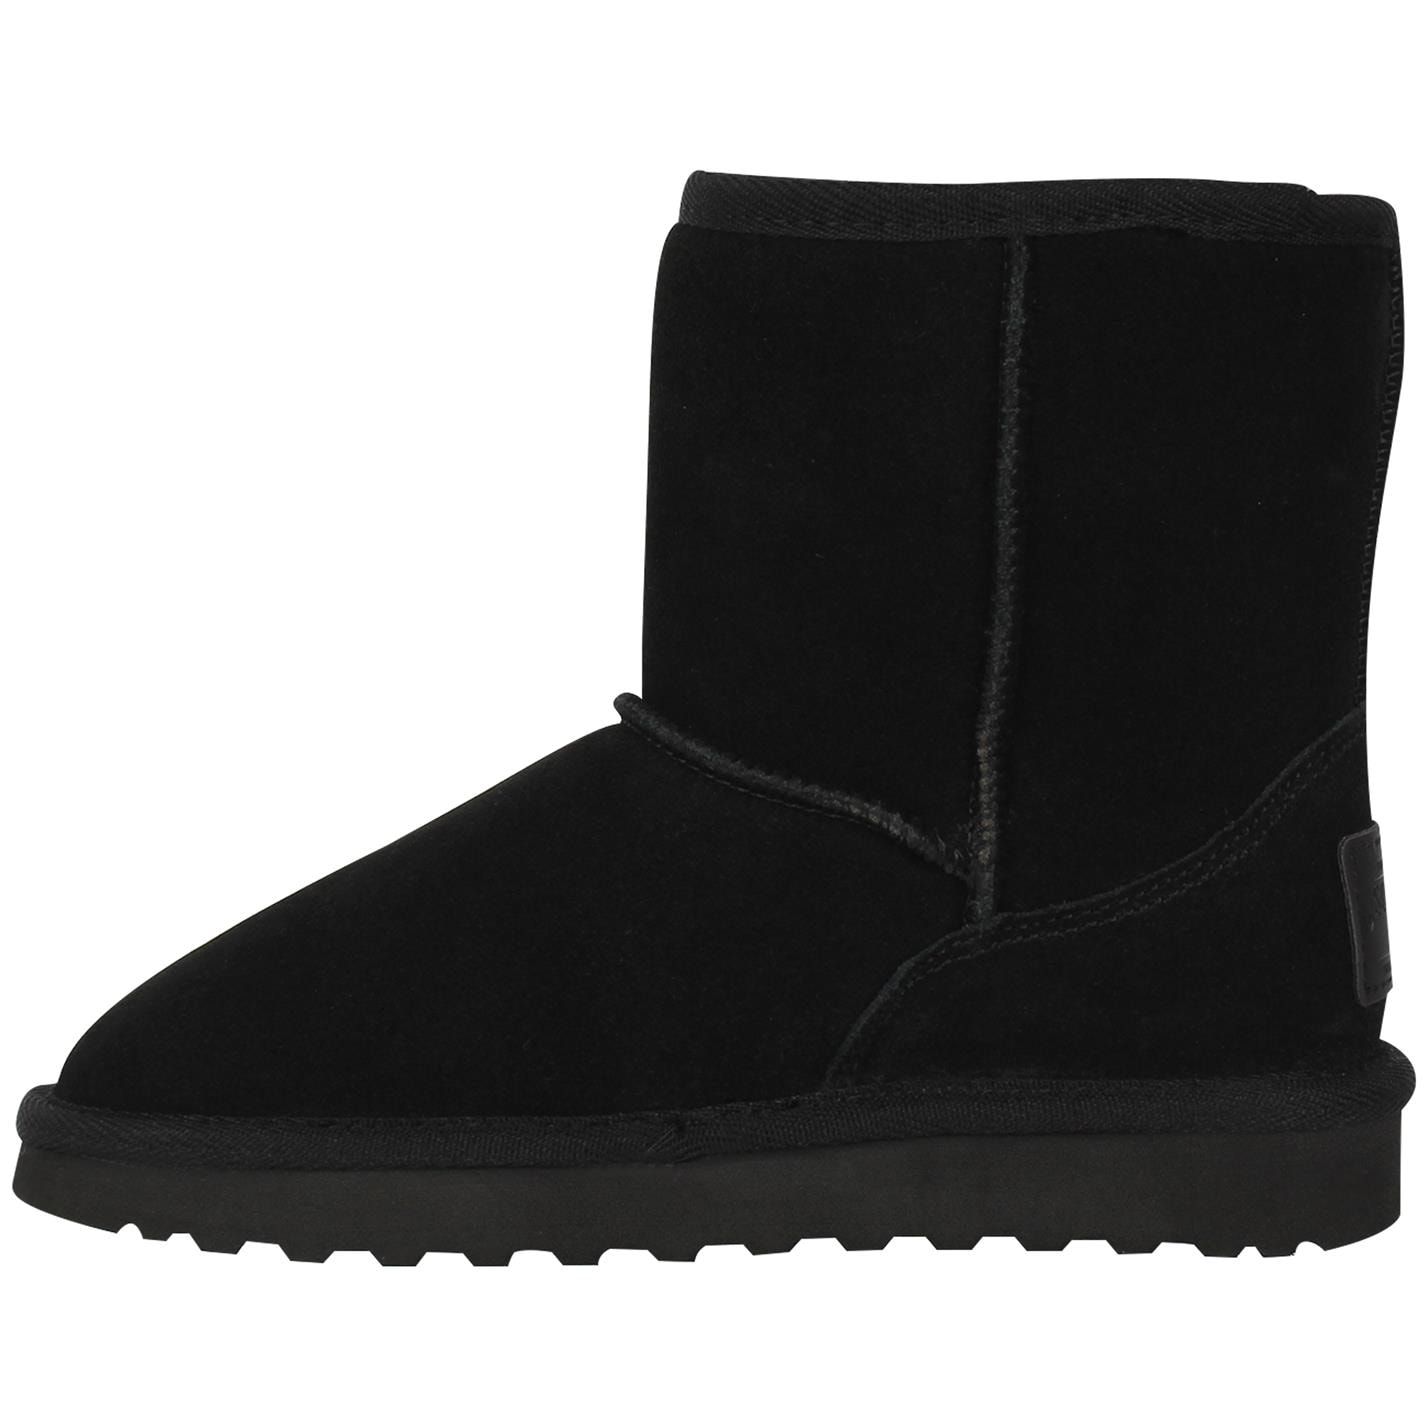 SoulCal Kids Selby Snug Winter Boots